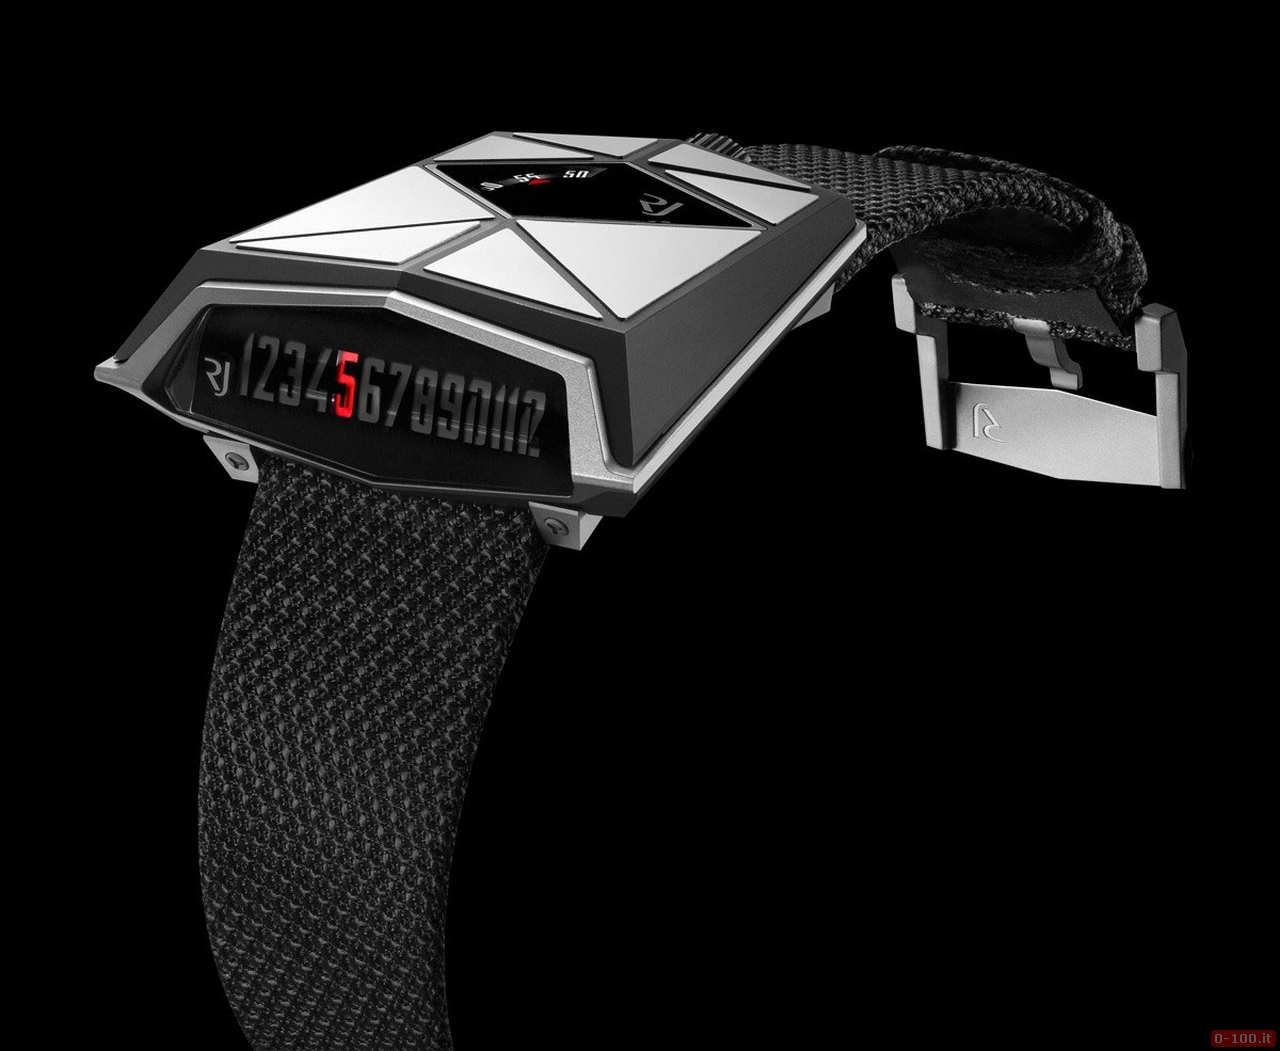 RJ-Romain Jerome unveils its first pilot's watch: the Spacecraft